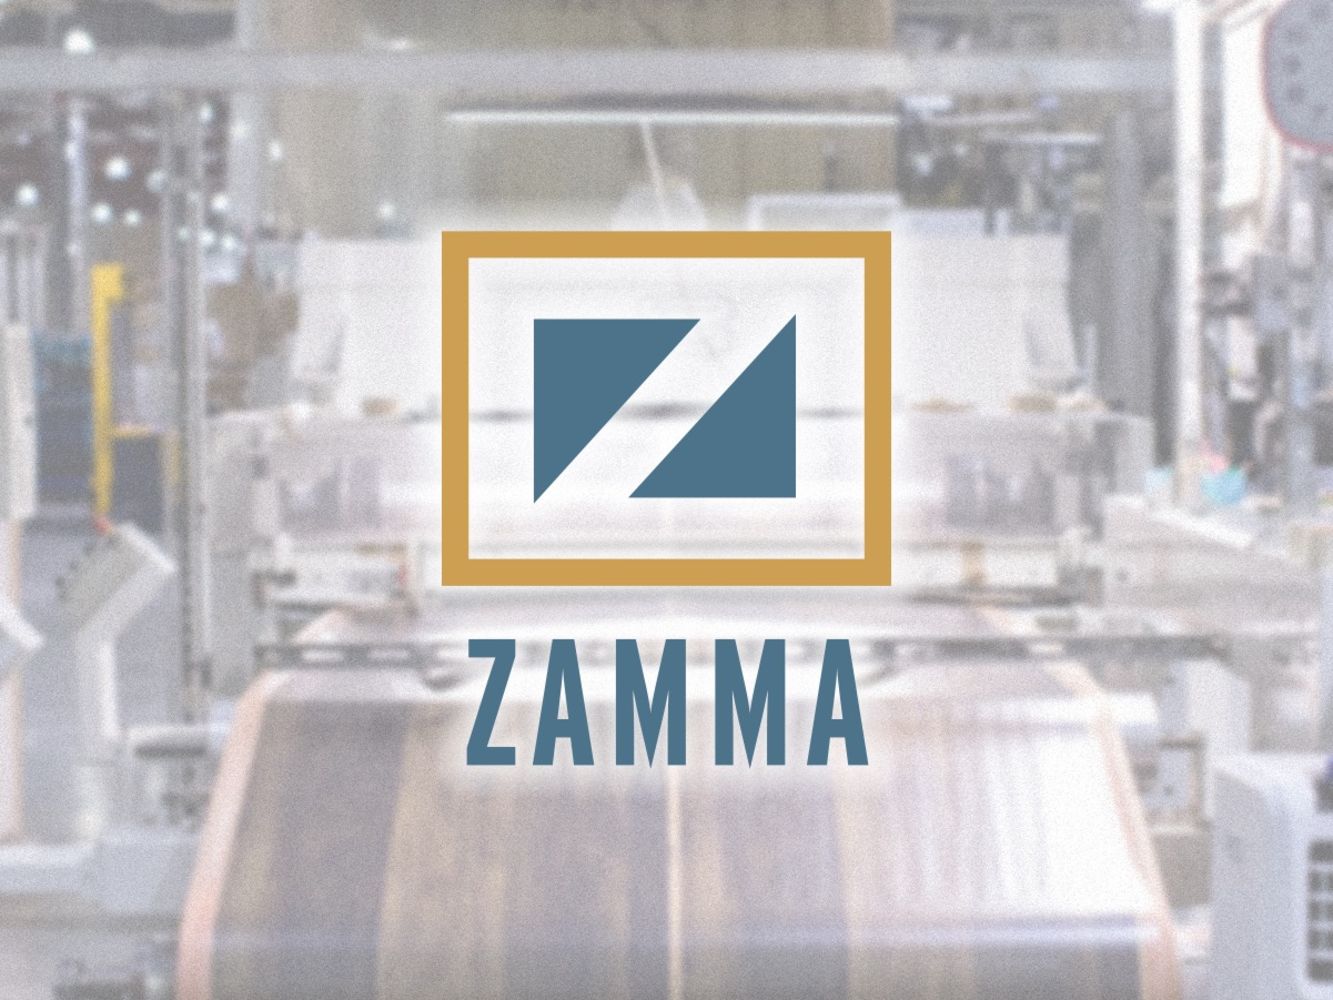 PVC & wood molding manufacturing – significant inventory – Surplus to operations of Zamma Corporation - Orange, VA